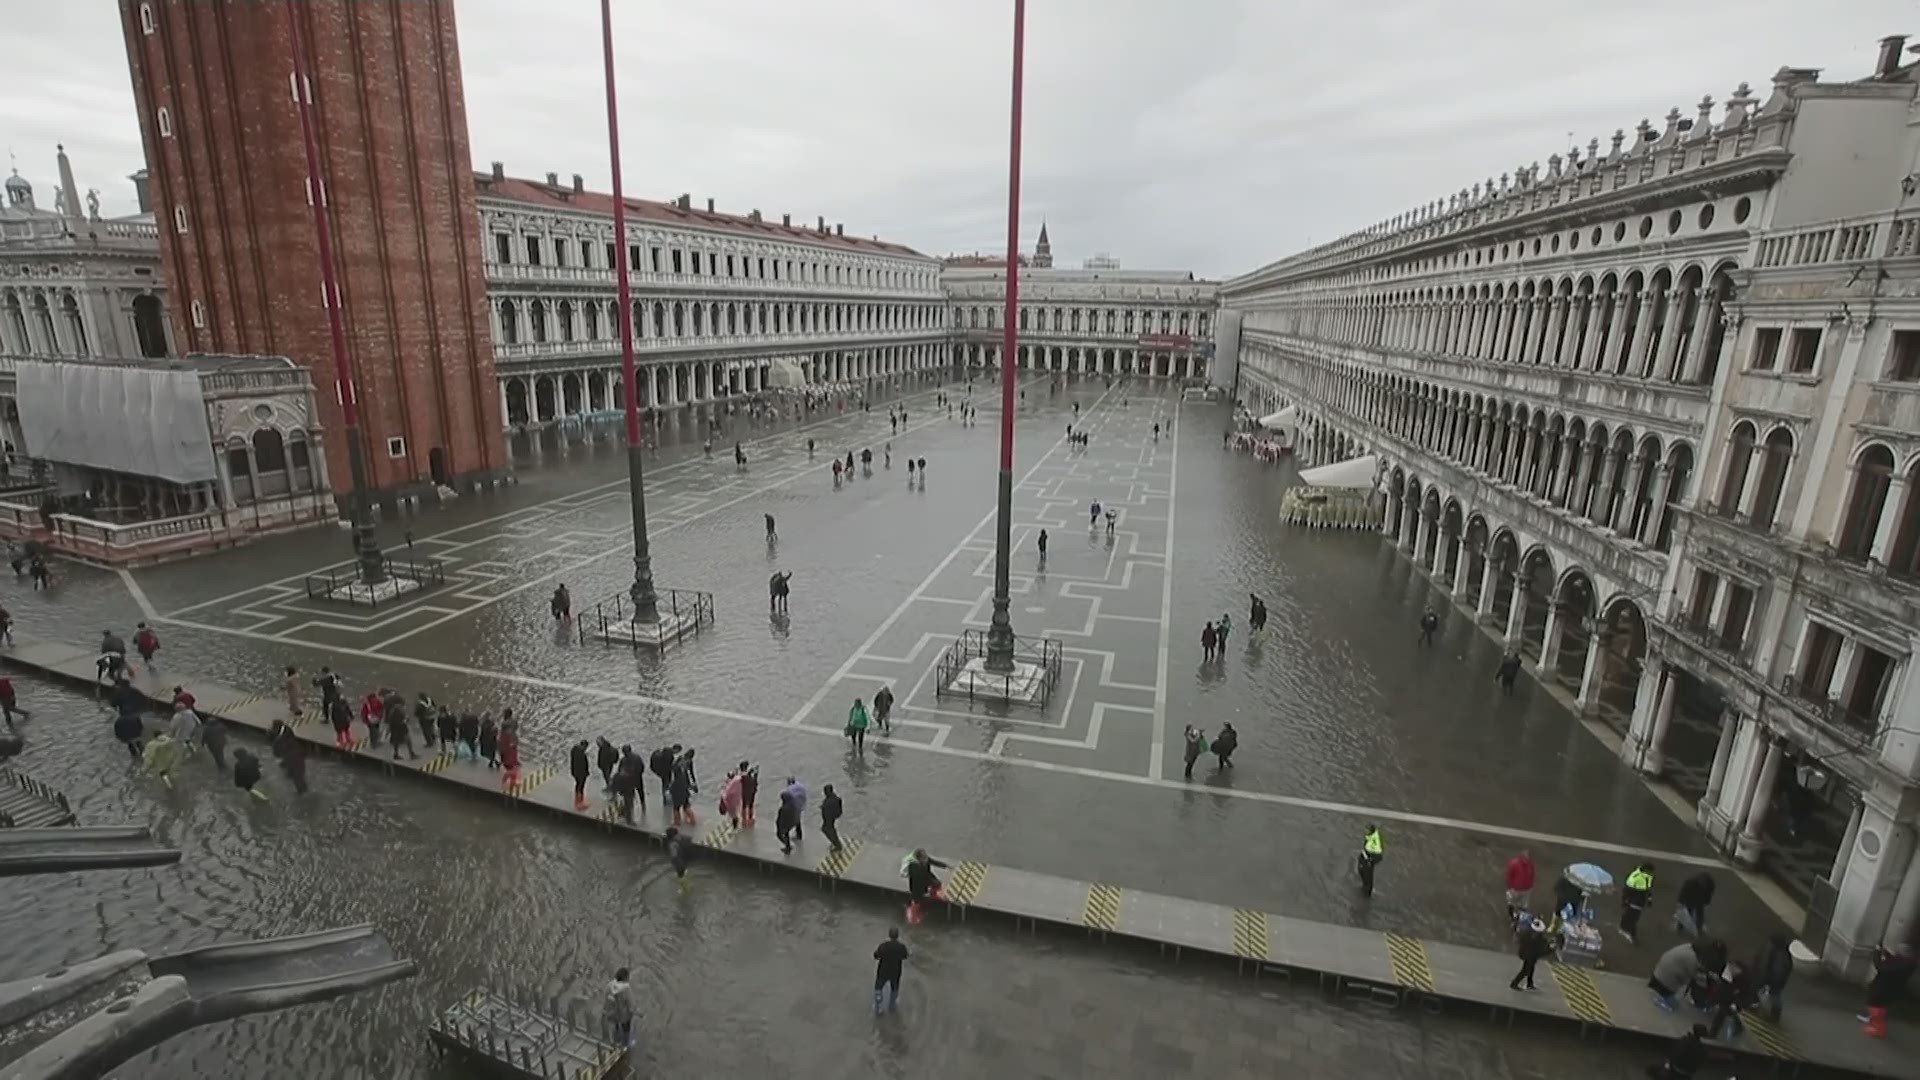 Tourists and Venetians alike have donned high boots and taken to raised walkways to slosh through the high water. (AP)